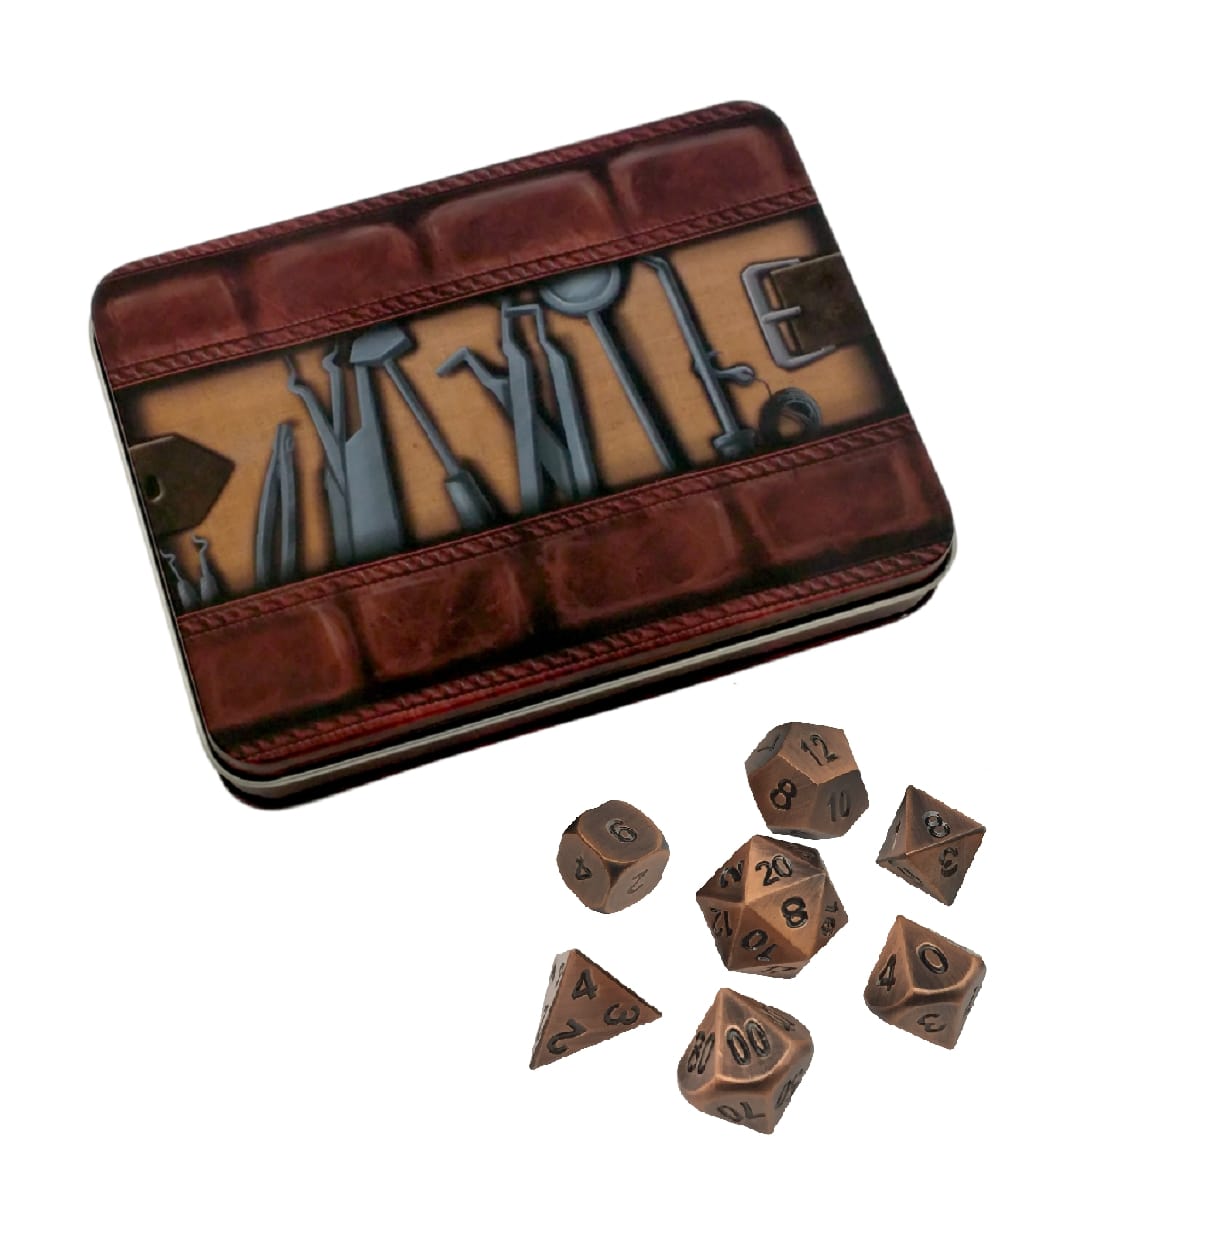 Thieves Tools with Metal Dice Sets